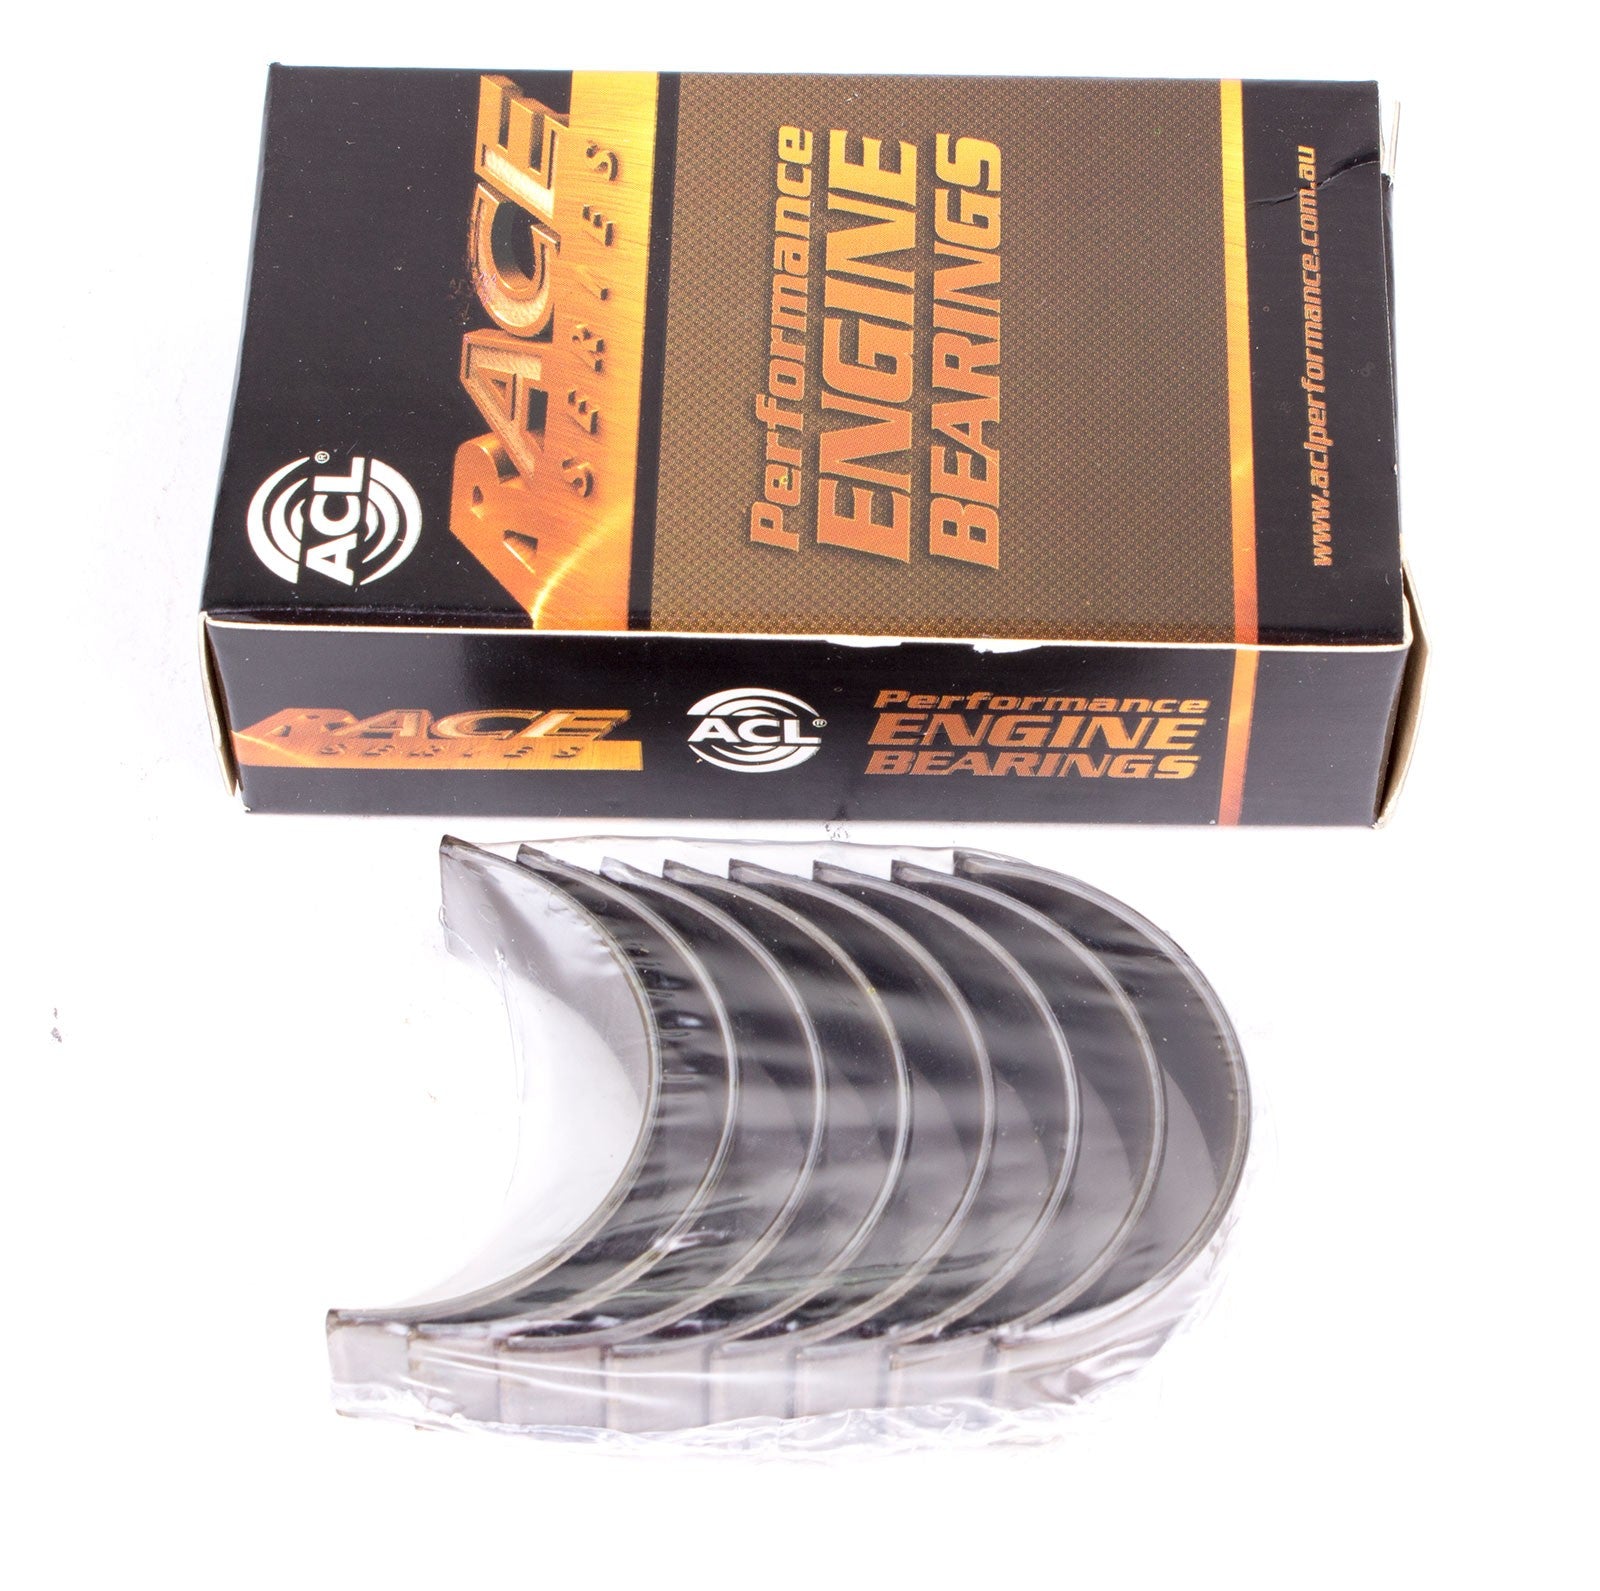 ACL 7M2398H-020 Main bearing set (ACL Race Series) Photo-0 